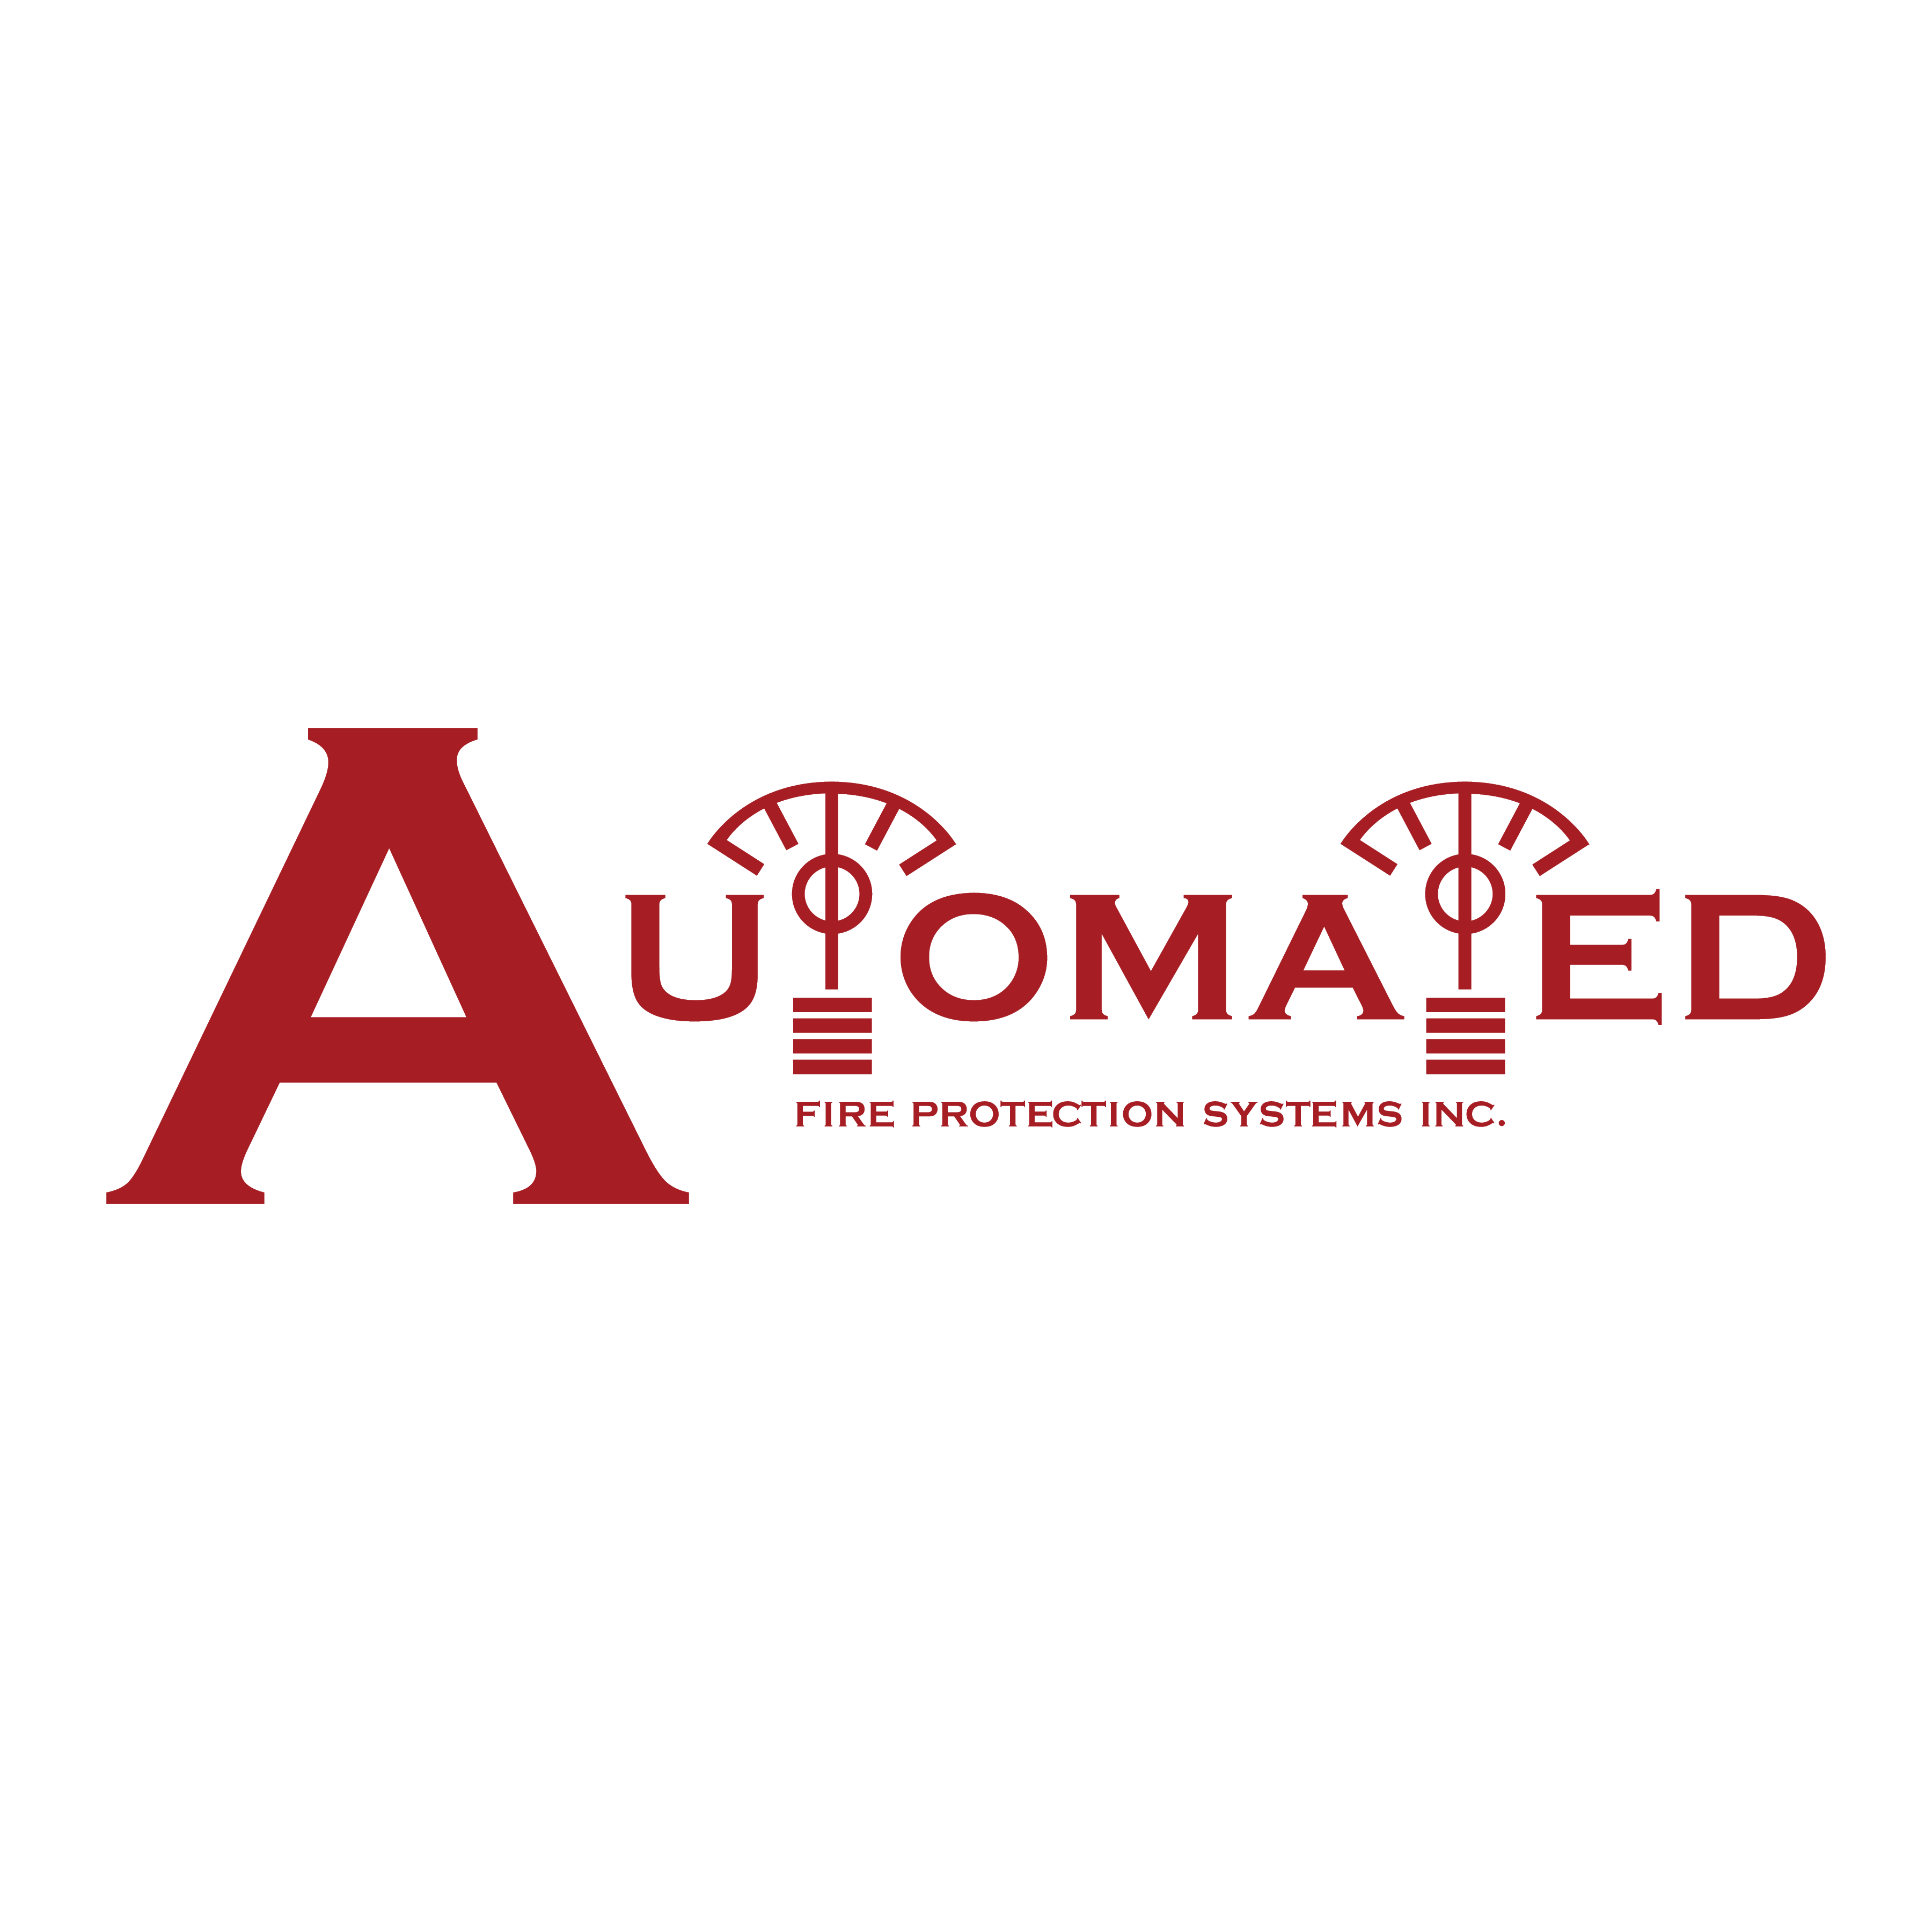 Automated Fire Protection Systems Inc.